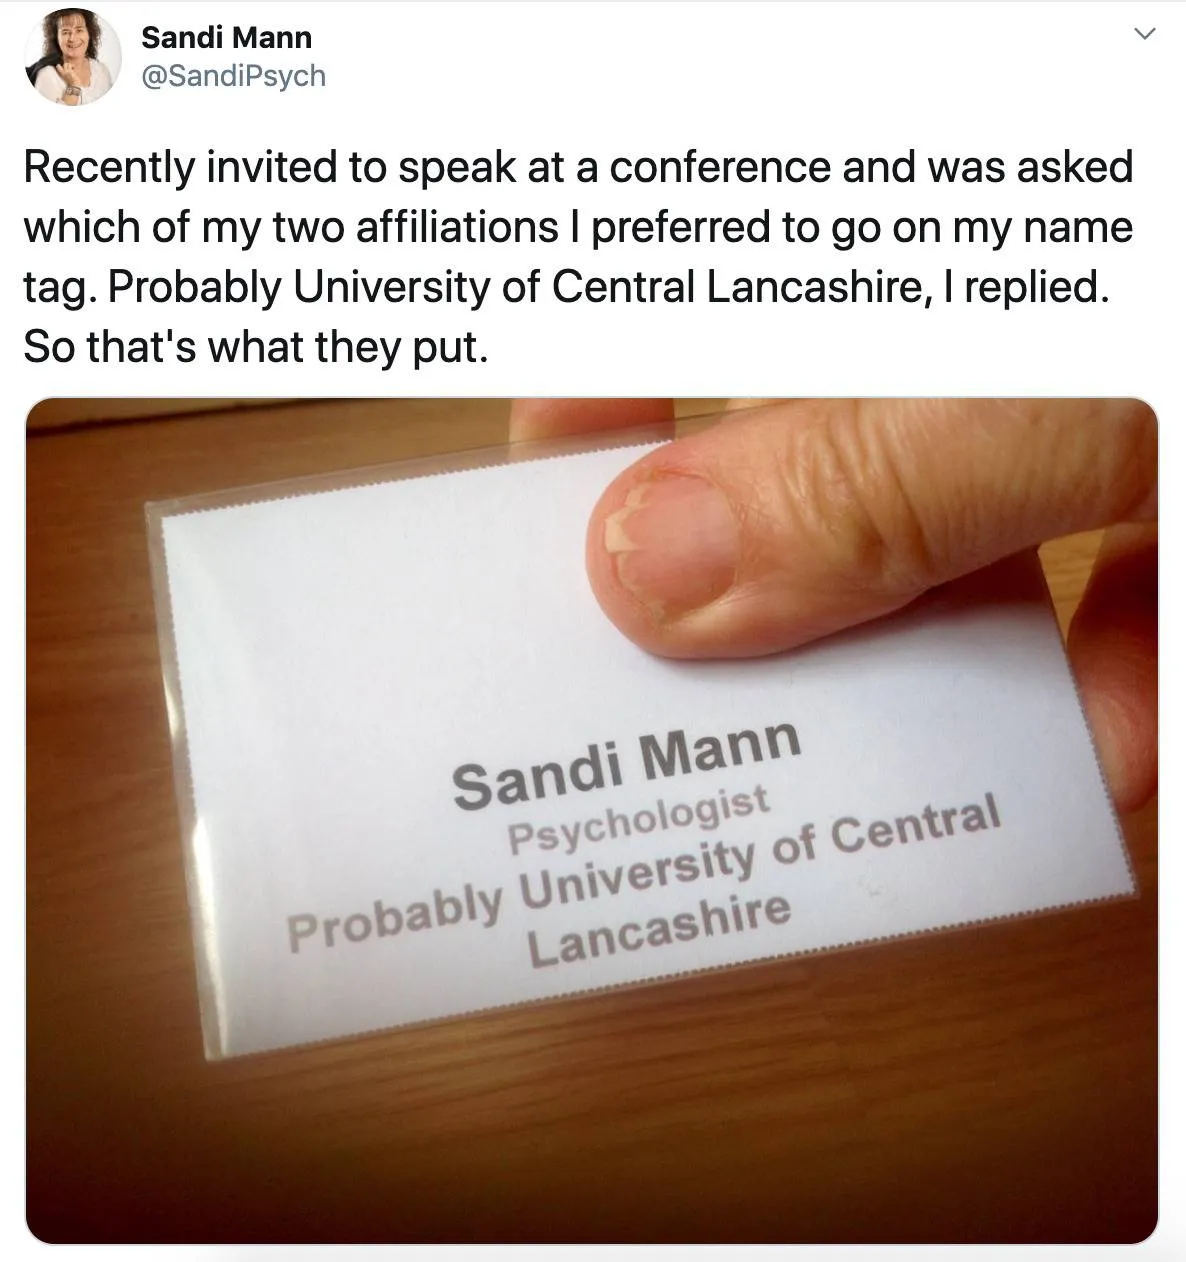 woman answered Probably University of Central Lancashire and someone put that on her tag 